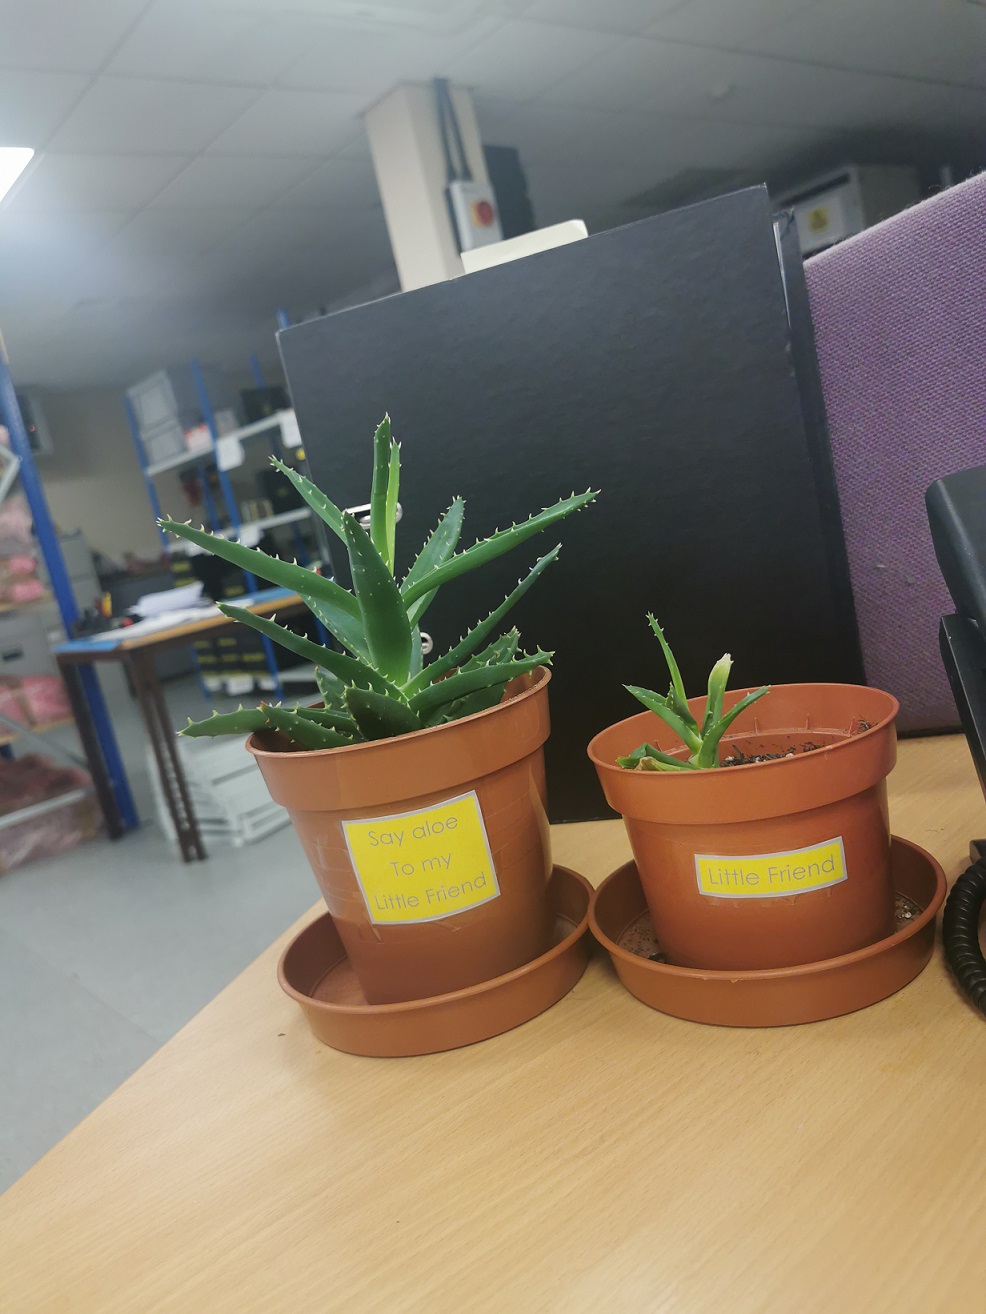 Electronic engineering and software company Like Technologies has created a greener office environment by introducing Aloe vera plantss